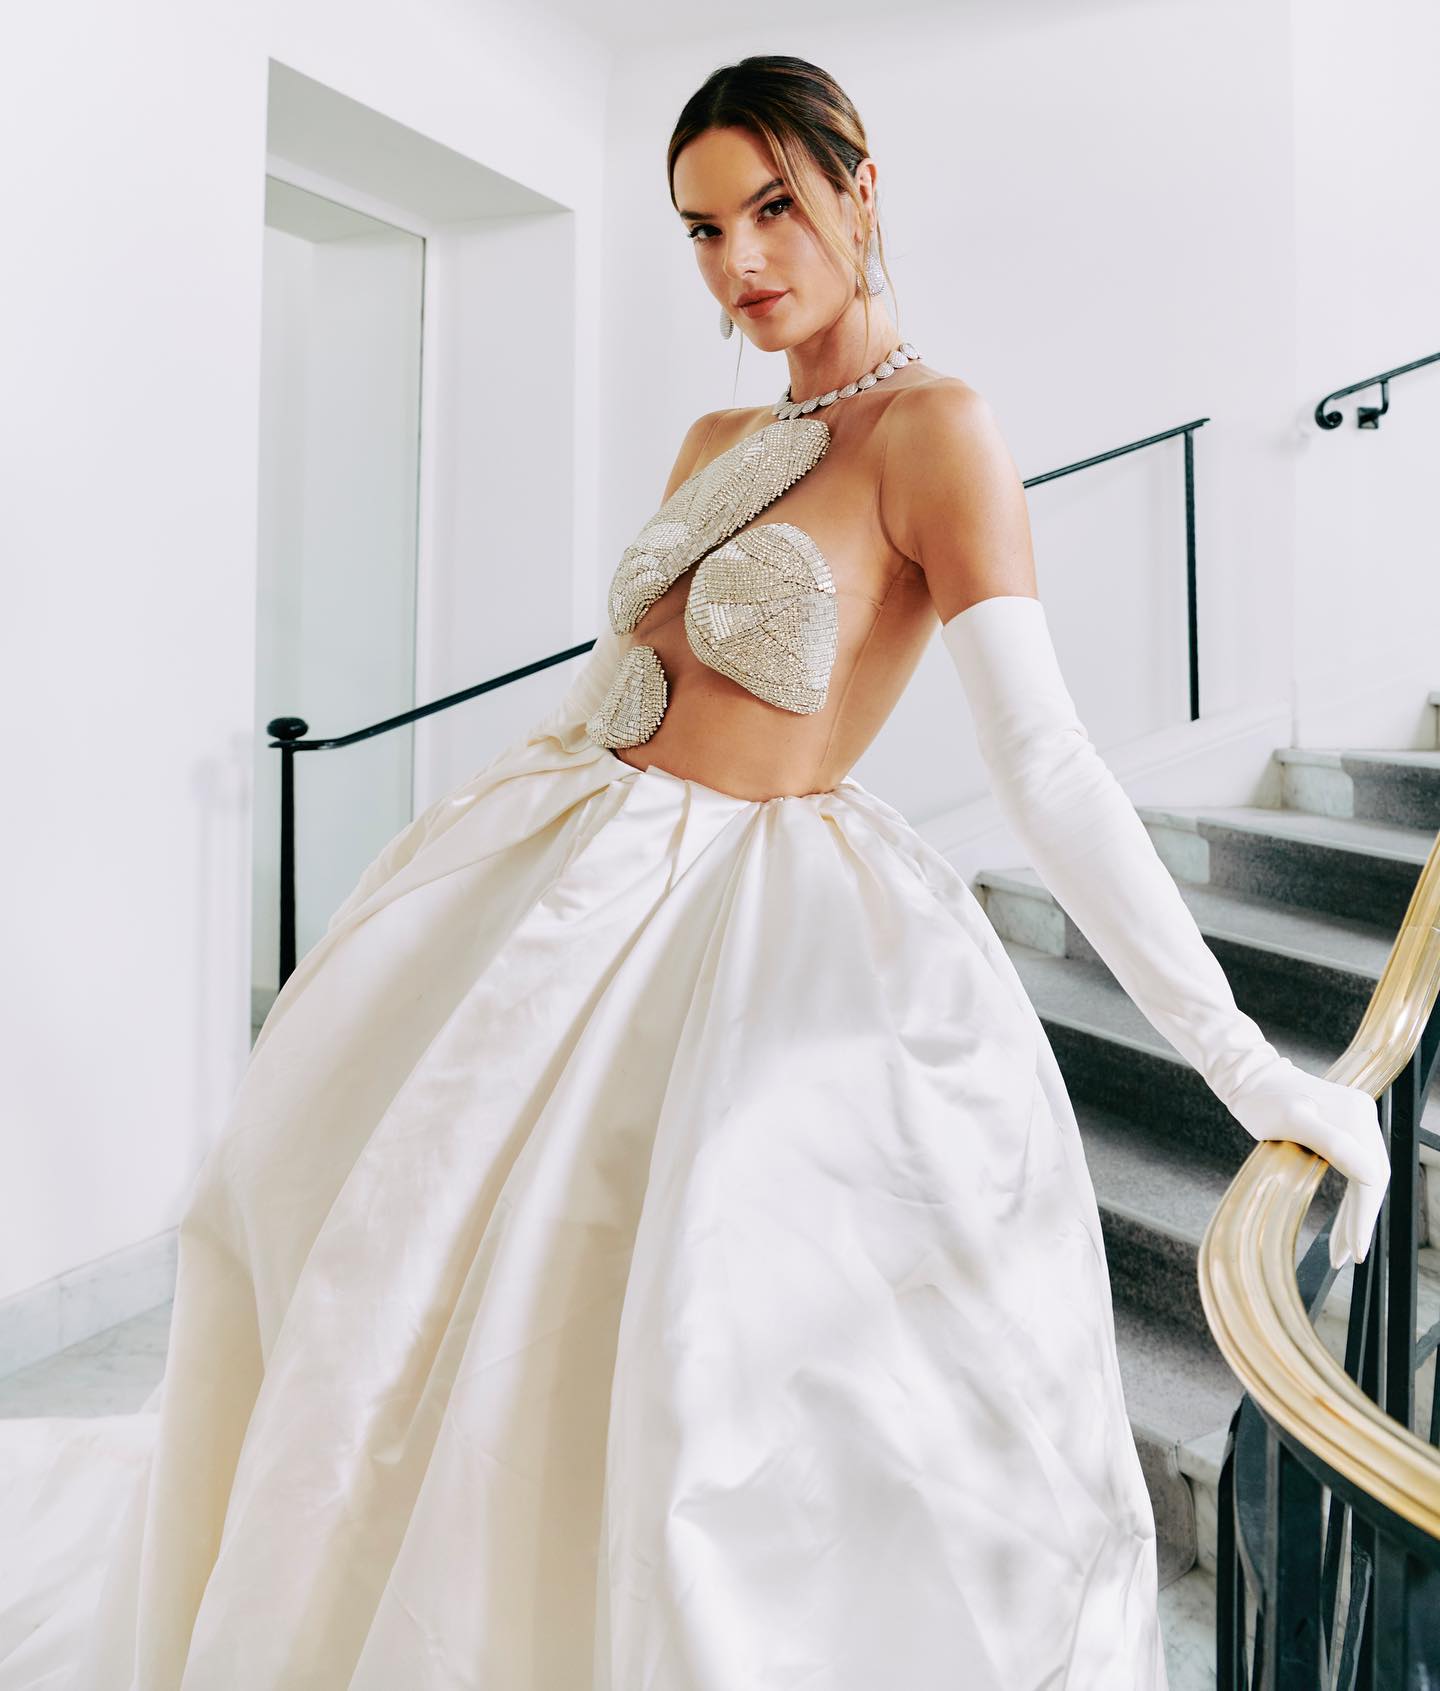 Alessandra Ambrosio Photoshoot before arrives 2022 Cannes Film Festival Day 01, May 2022